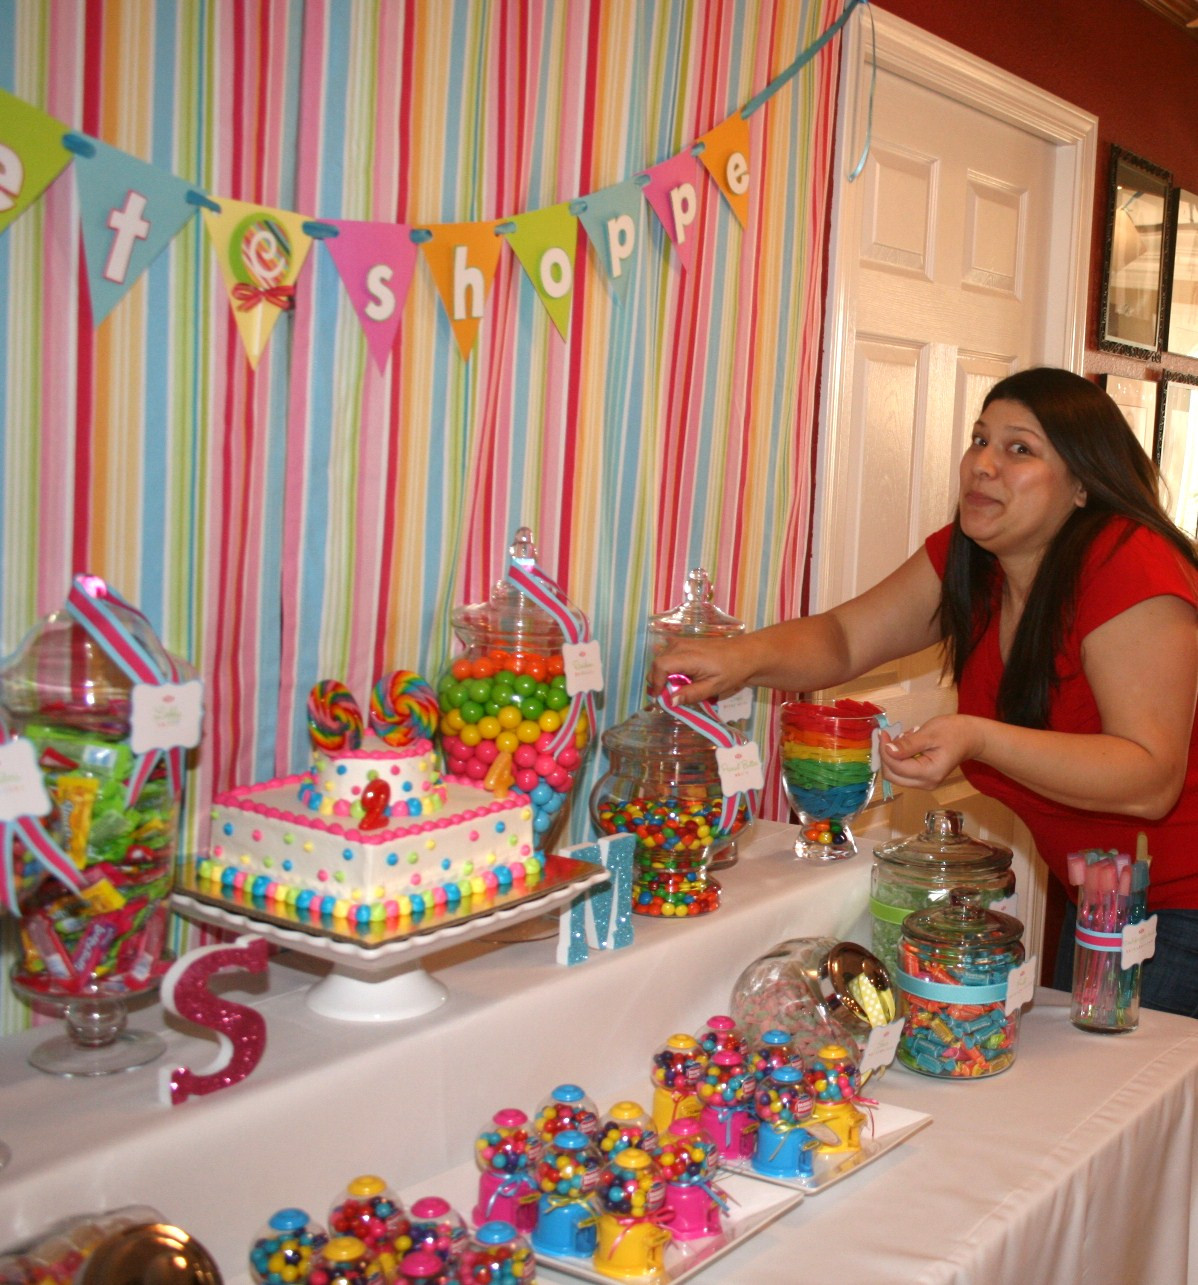 Candyland Birthday Decorations
 My Two Cupcakes Sienna & Mateo s Candyland Birthday Party